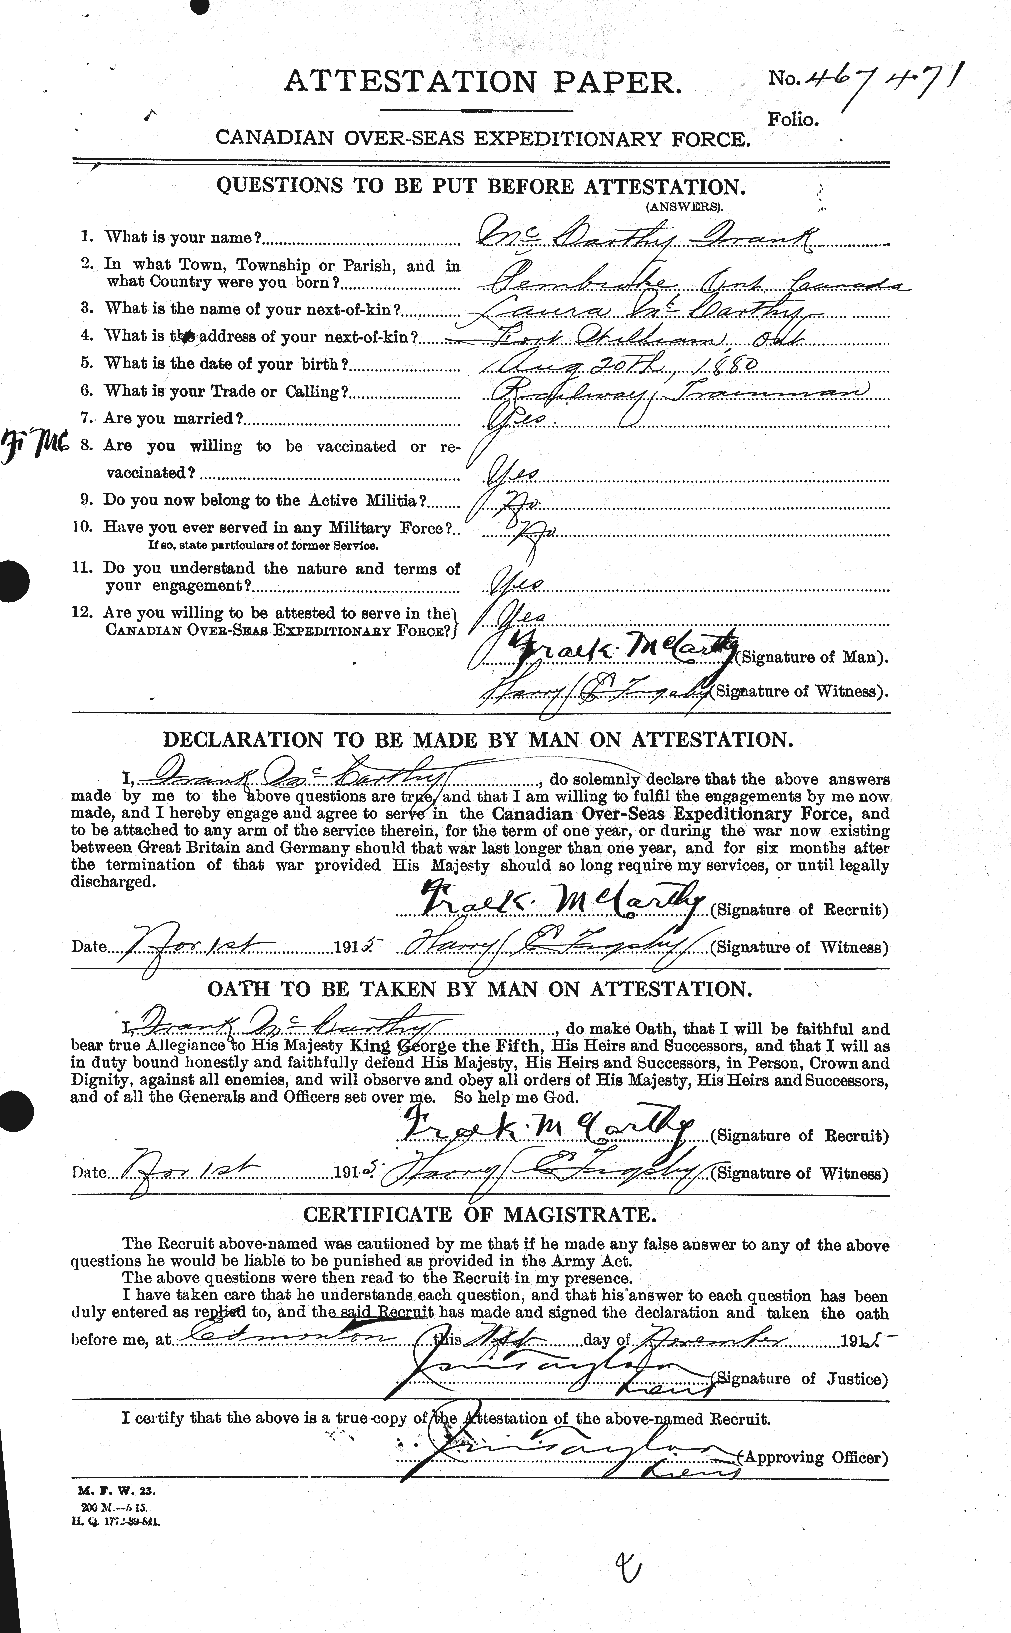 Personnel Records of the First World War - CEF 132243a